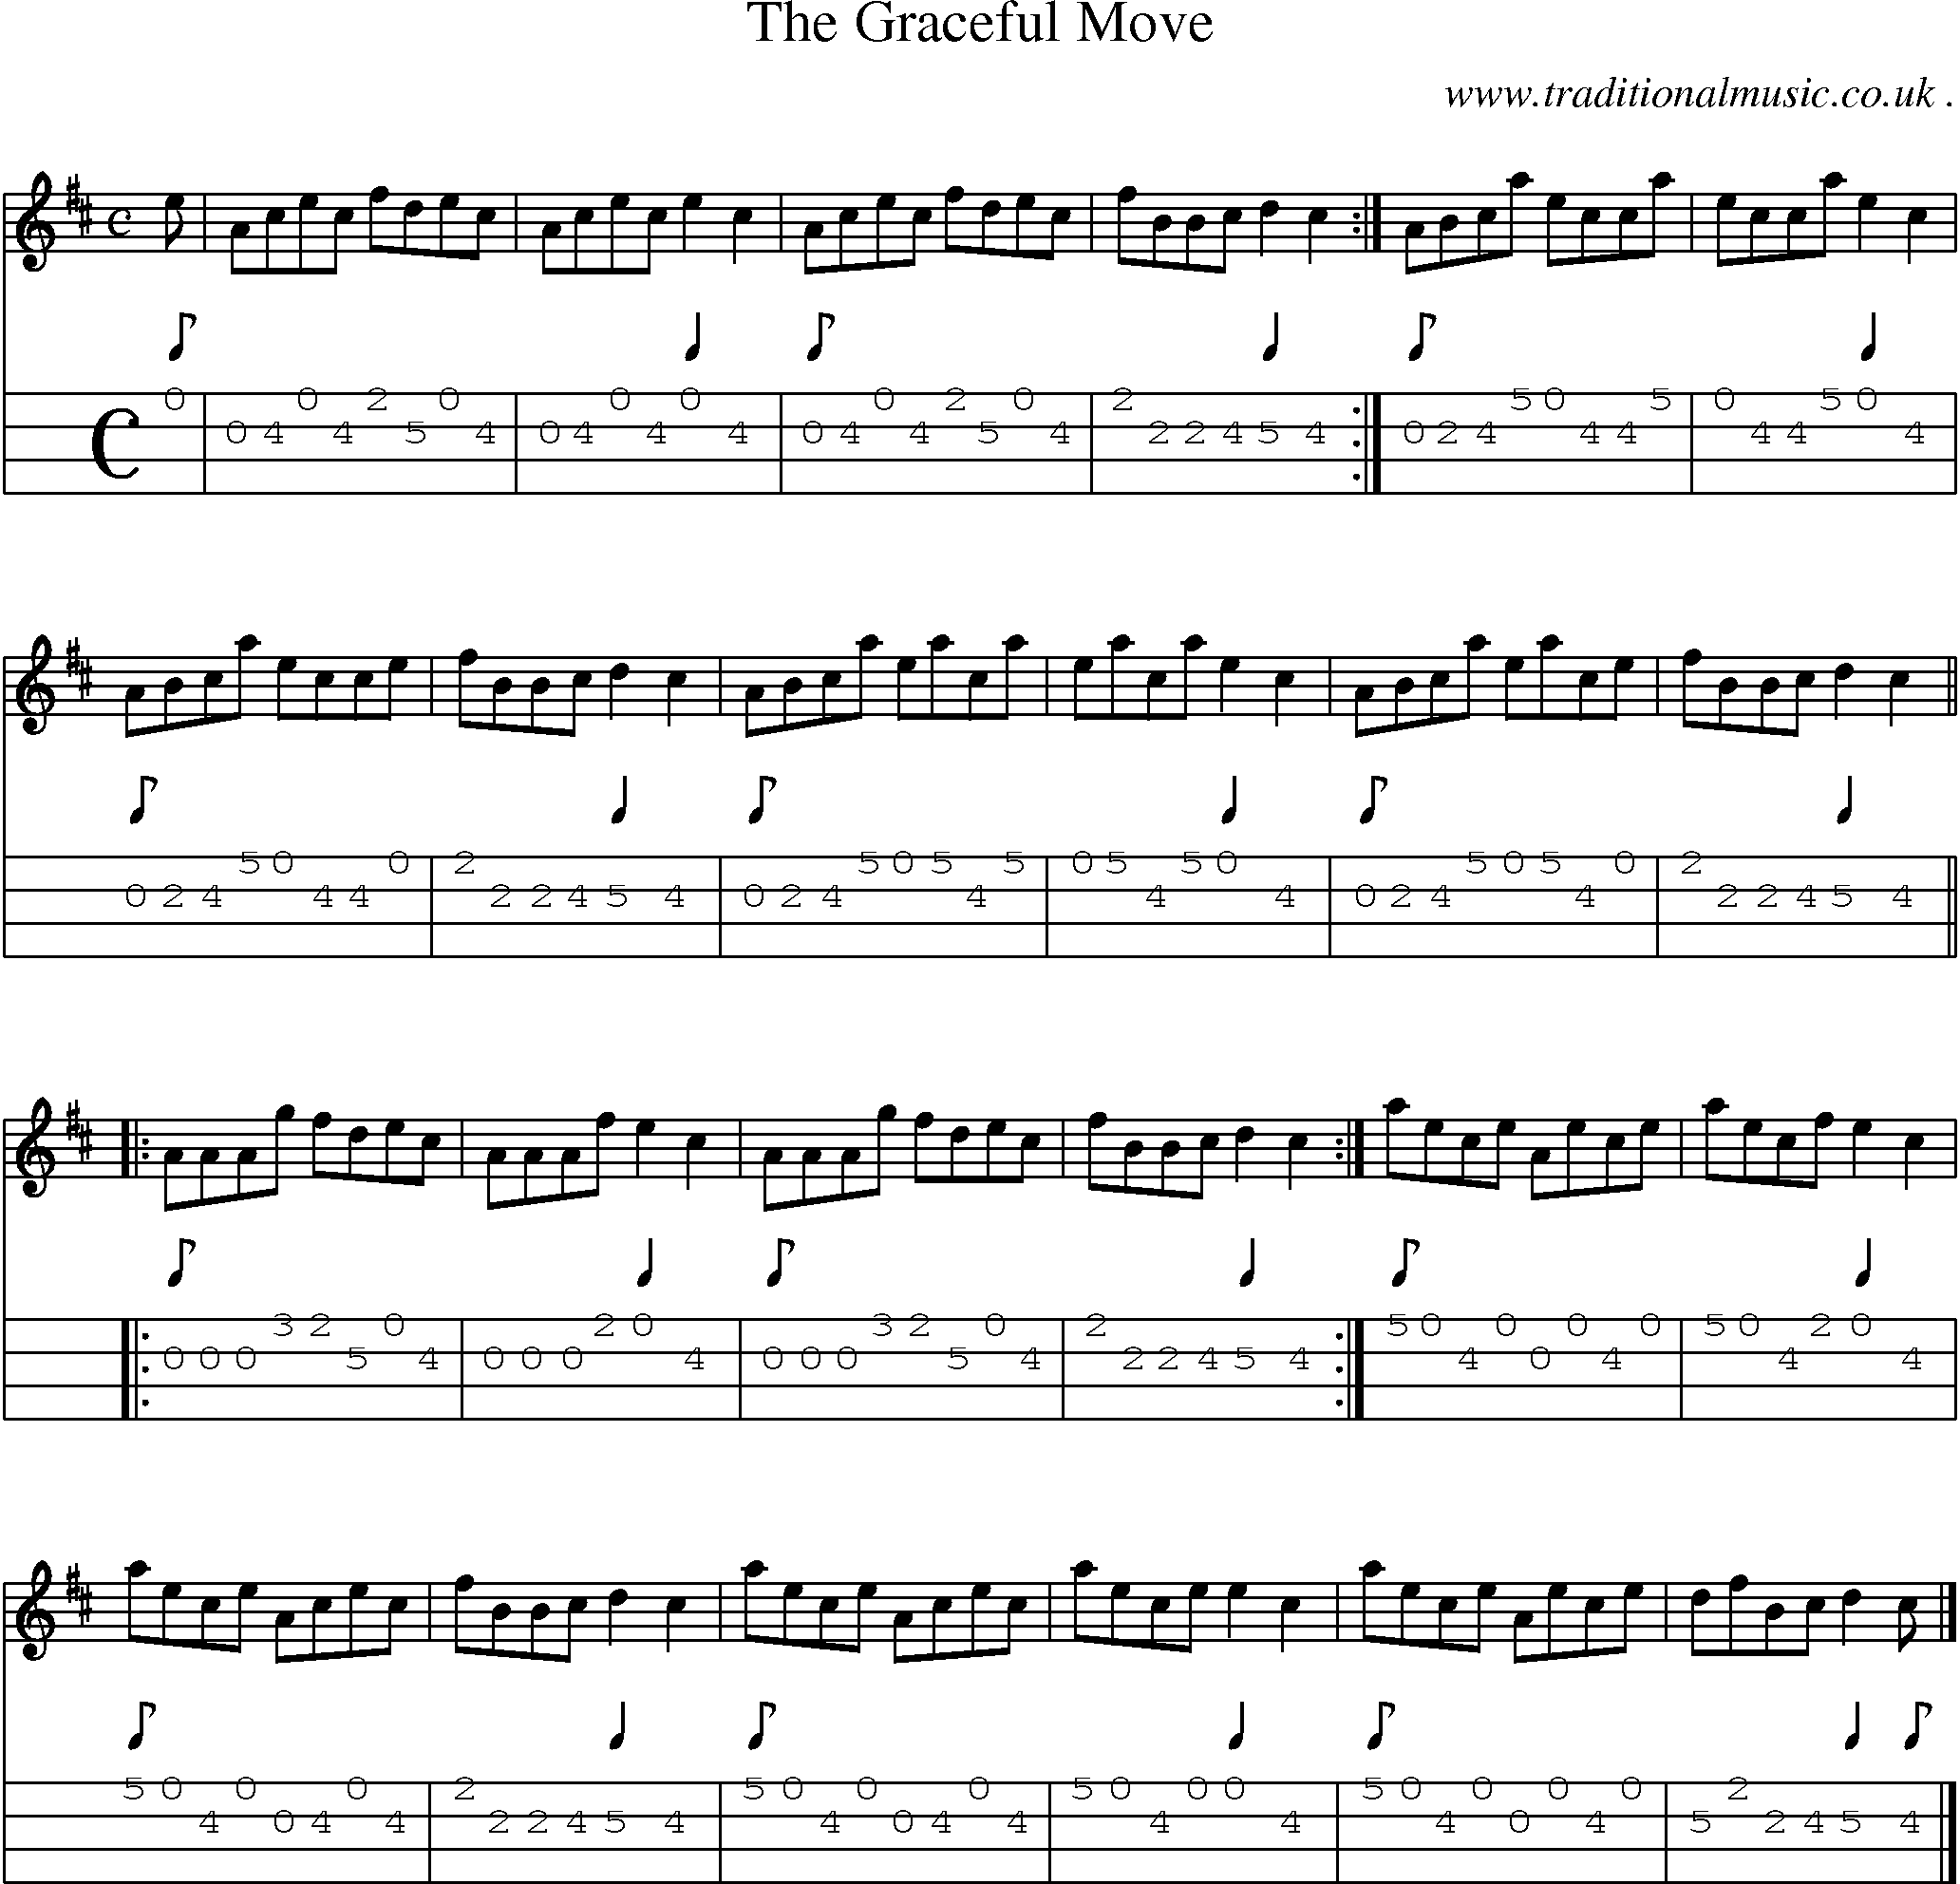 Sheet-music  score, Chords and Mandolin Tabs for The Graceful Move